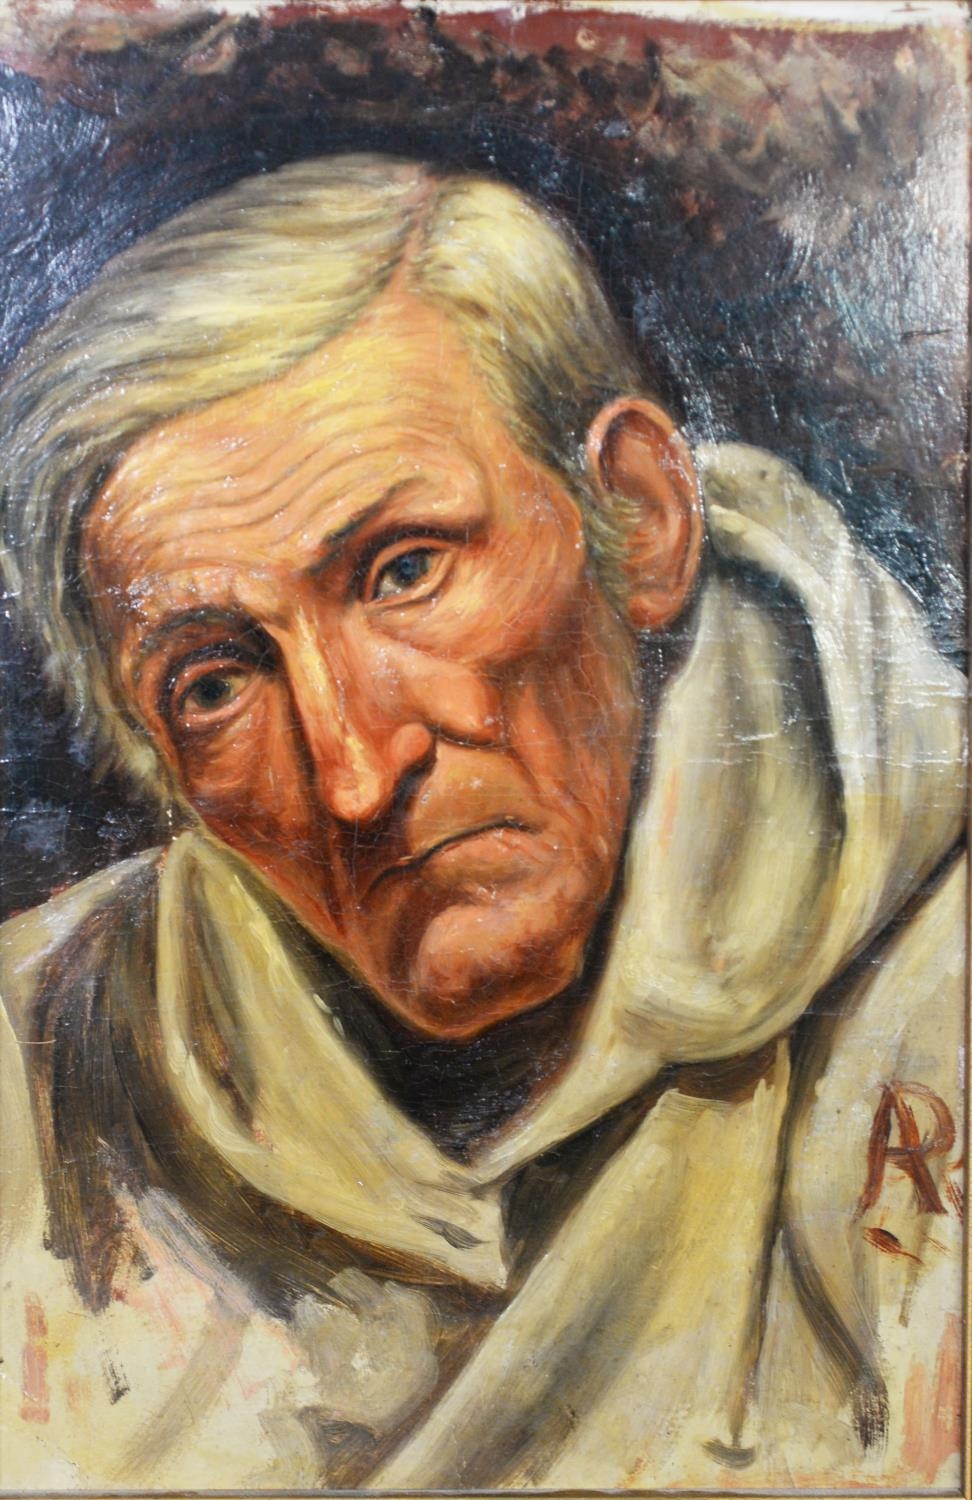 UNATTRIBUTED OIL PAINTING ON BOARD Portrait of a Monk 18in x 11 3/4in (46 x 30cm)